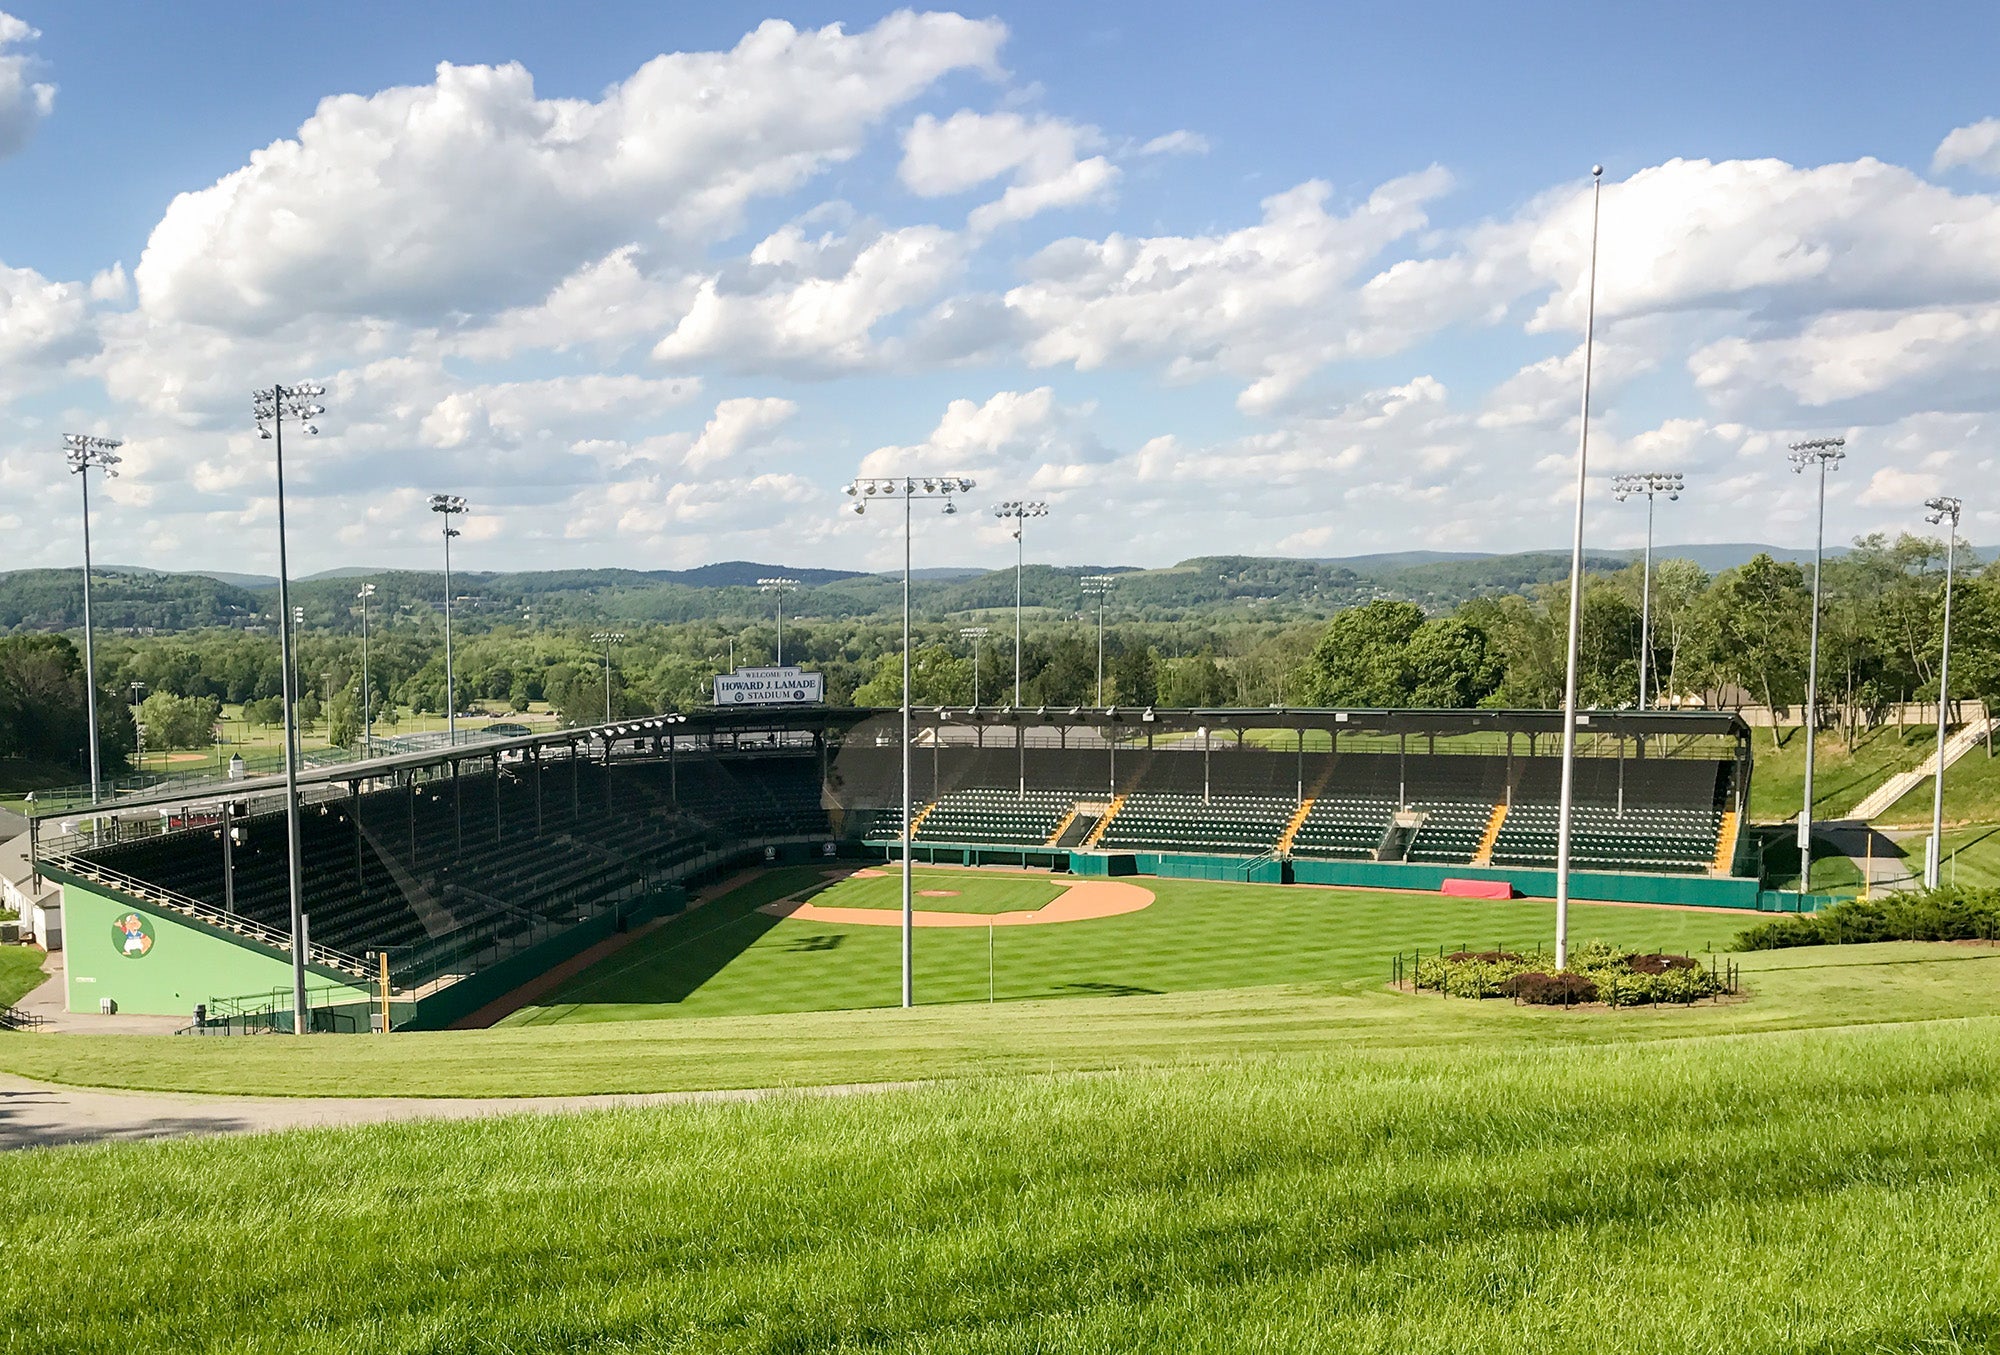 Williamsport, Pa. will host the 2017 Little League World Series, Aug. 17-27.